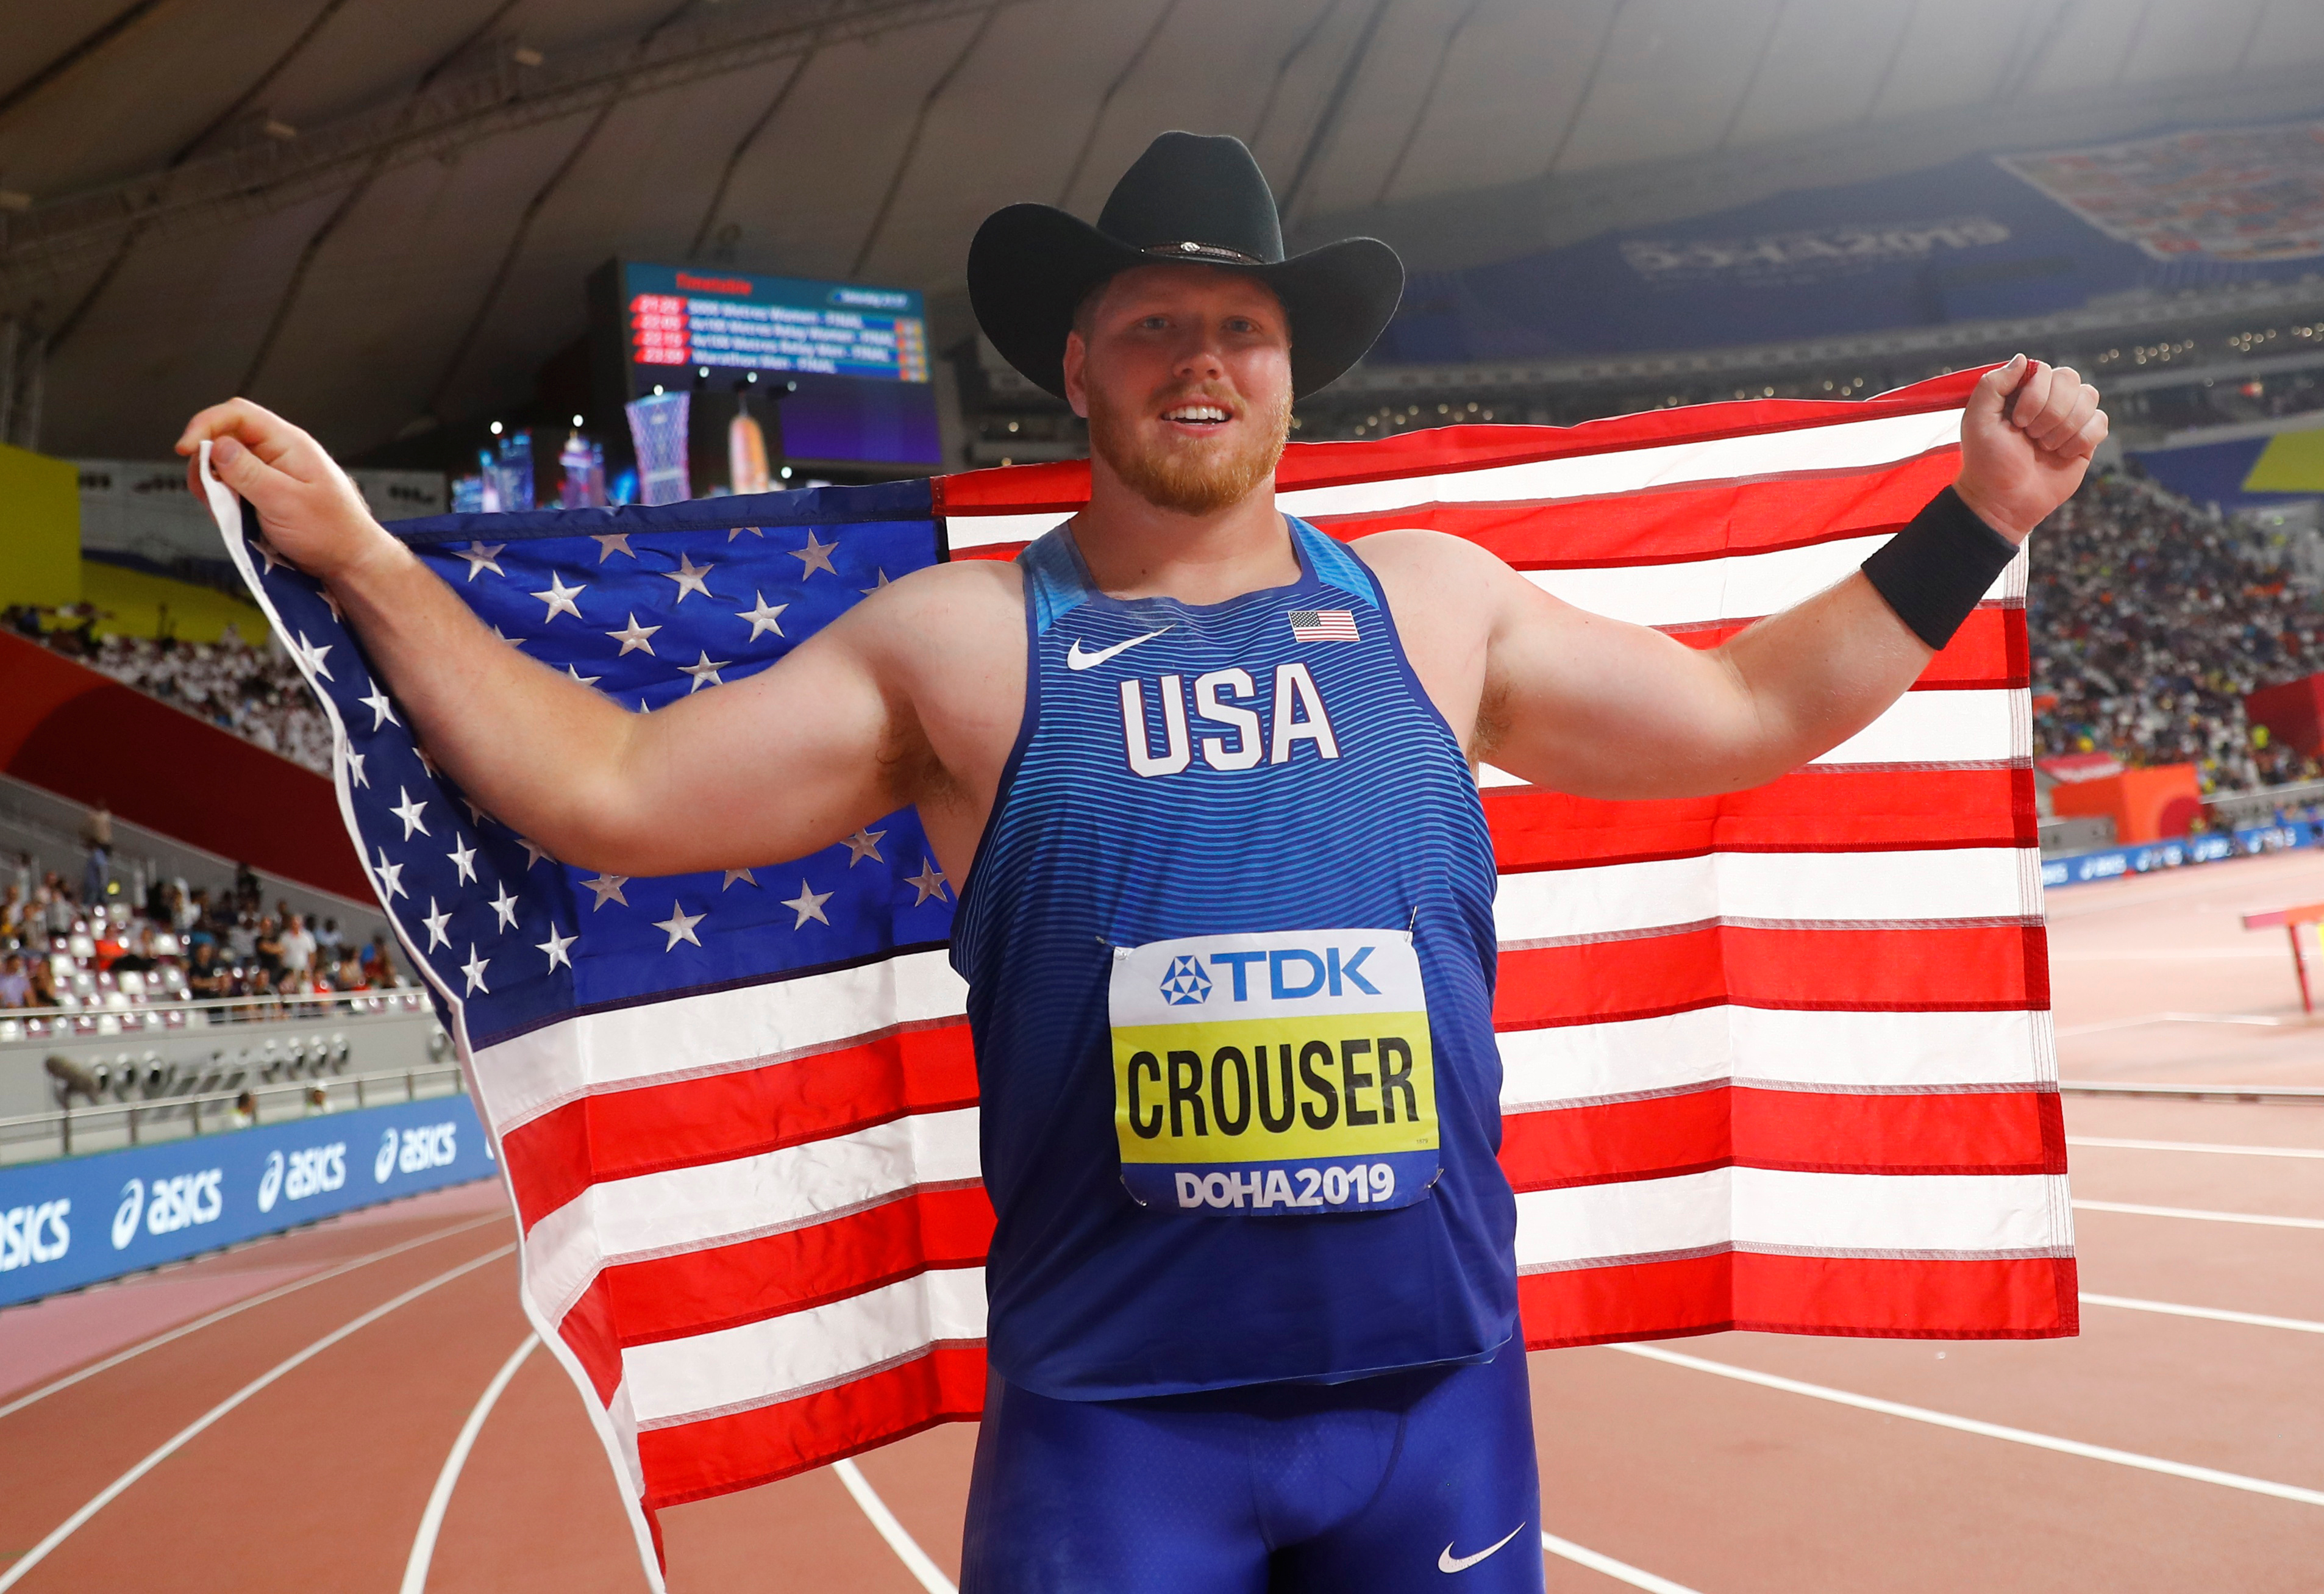 Ryan Crouser courtesy "With just one gold secured" in Tokyo Olympics